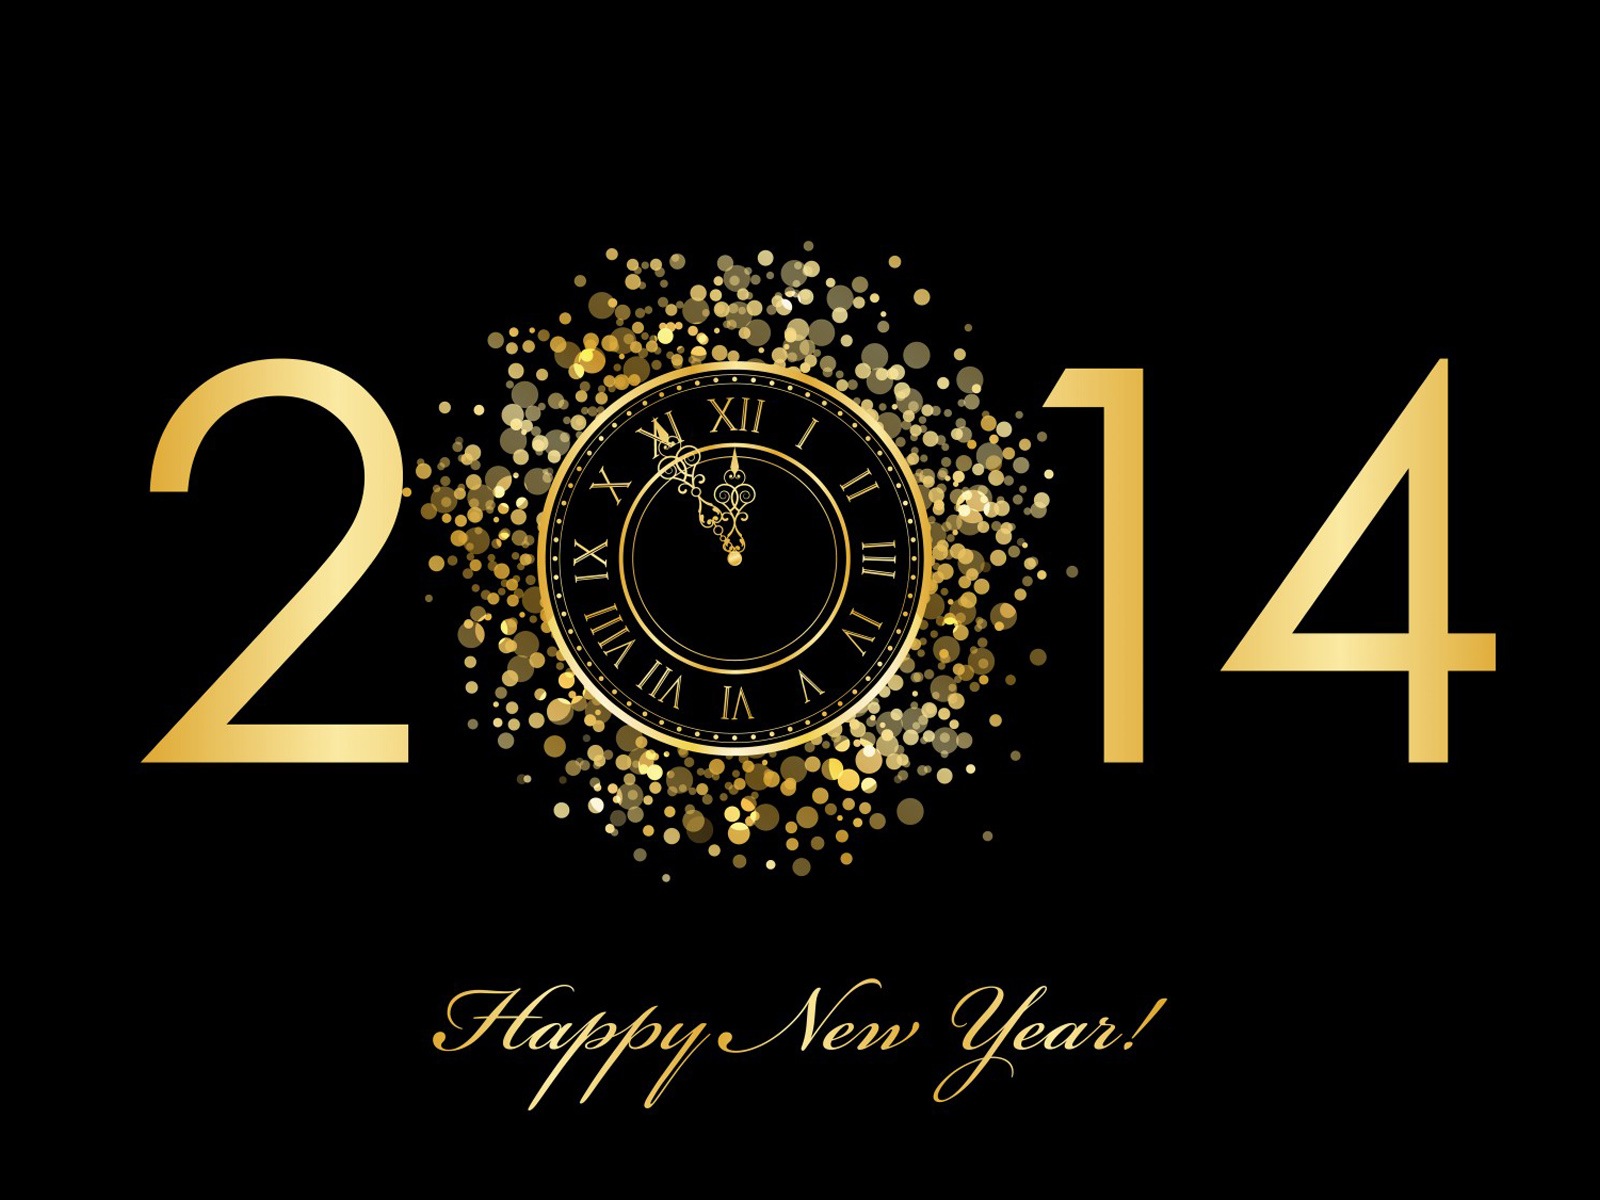 2014 New Year Theme HD Wallpapers (1) #1 - 1600x1200